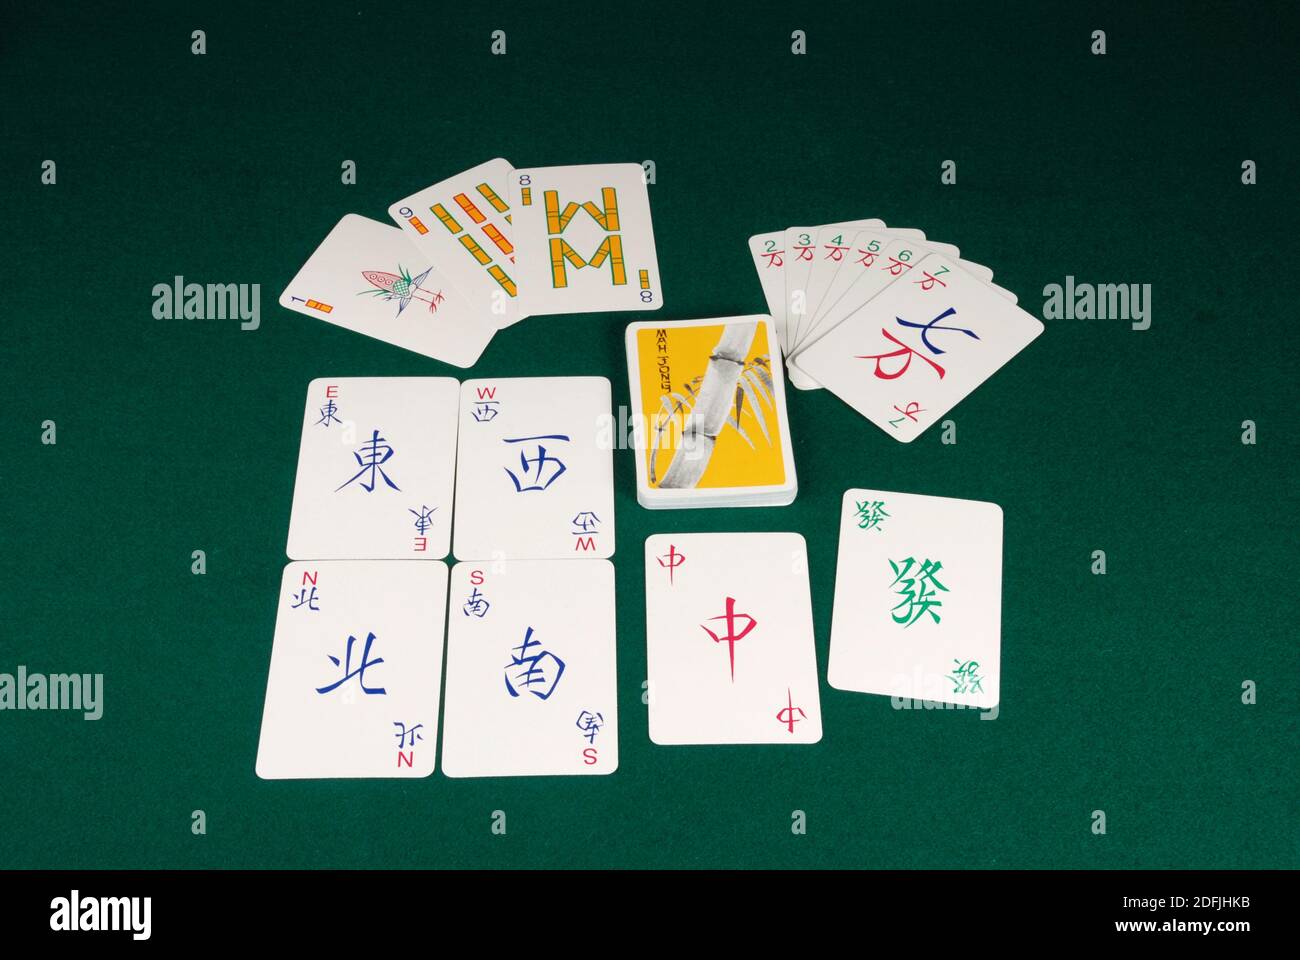 Mah-Jong, the chinese board game, can be played with Mah-Jong cards. A pack contains 144 cards representing the Mah-Jong tiles. Stock Photo